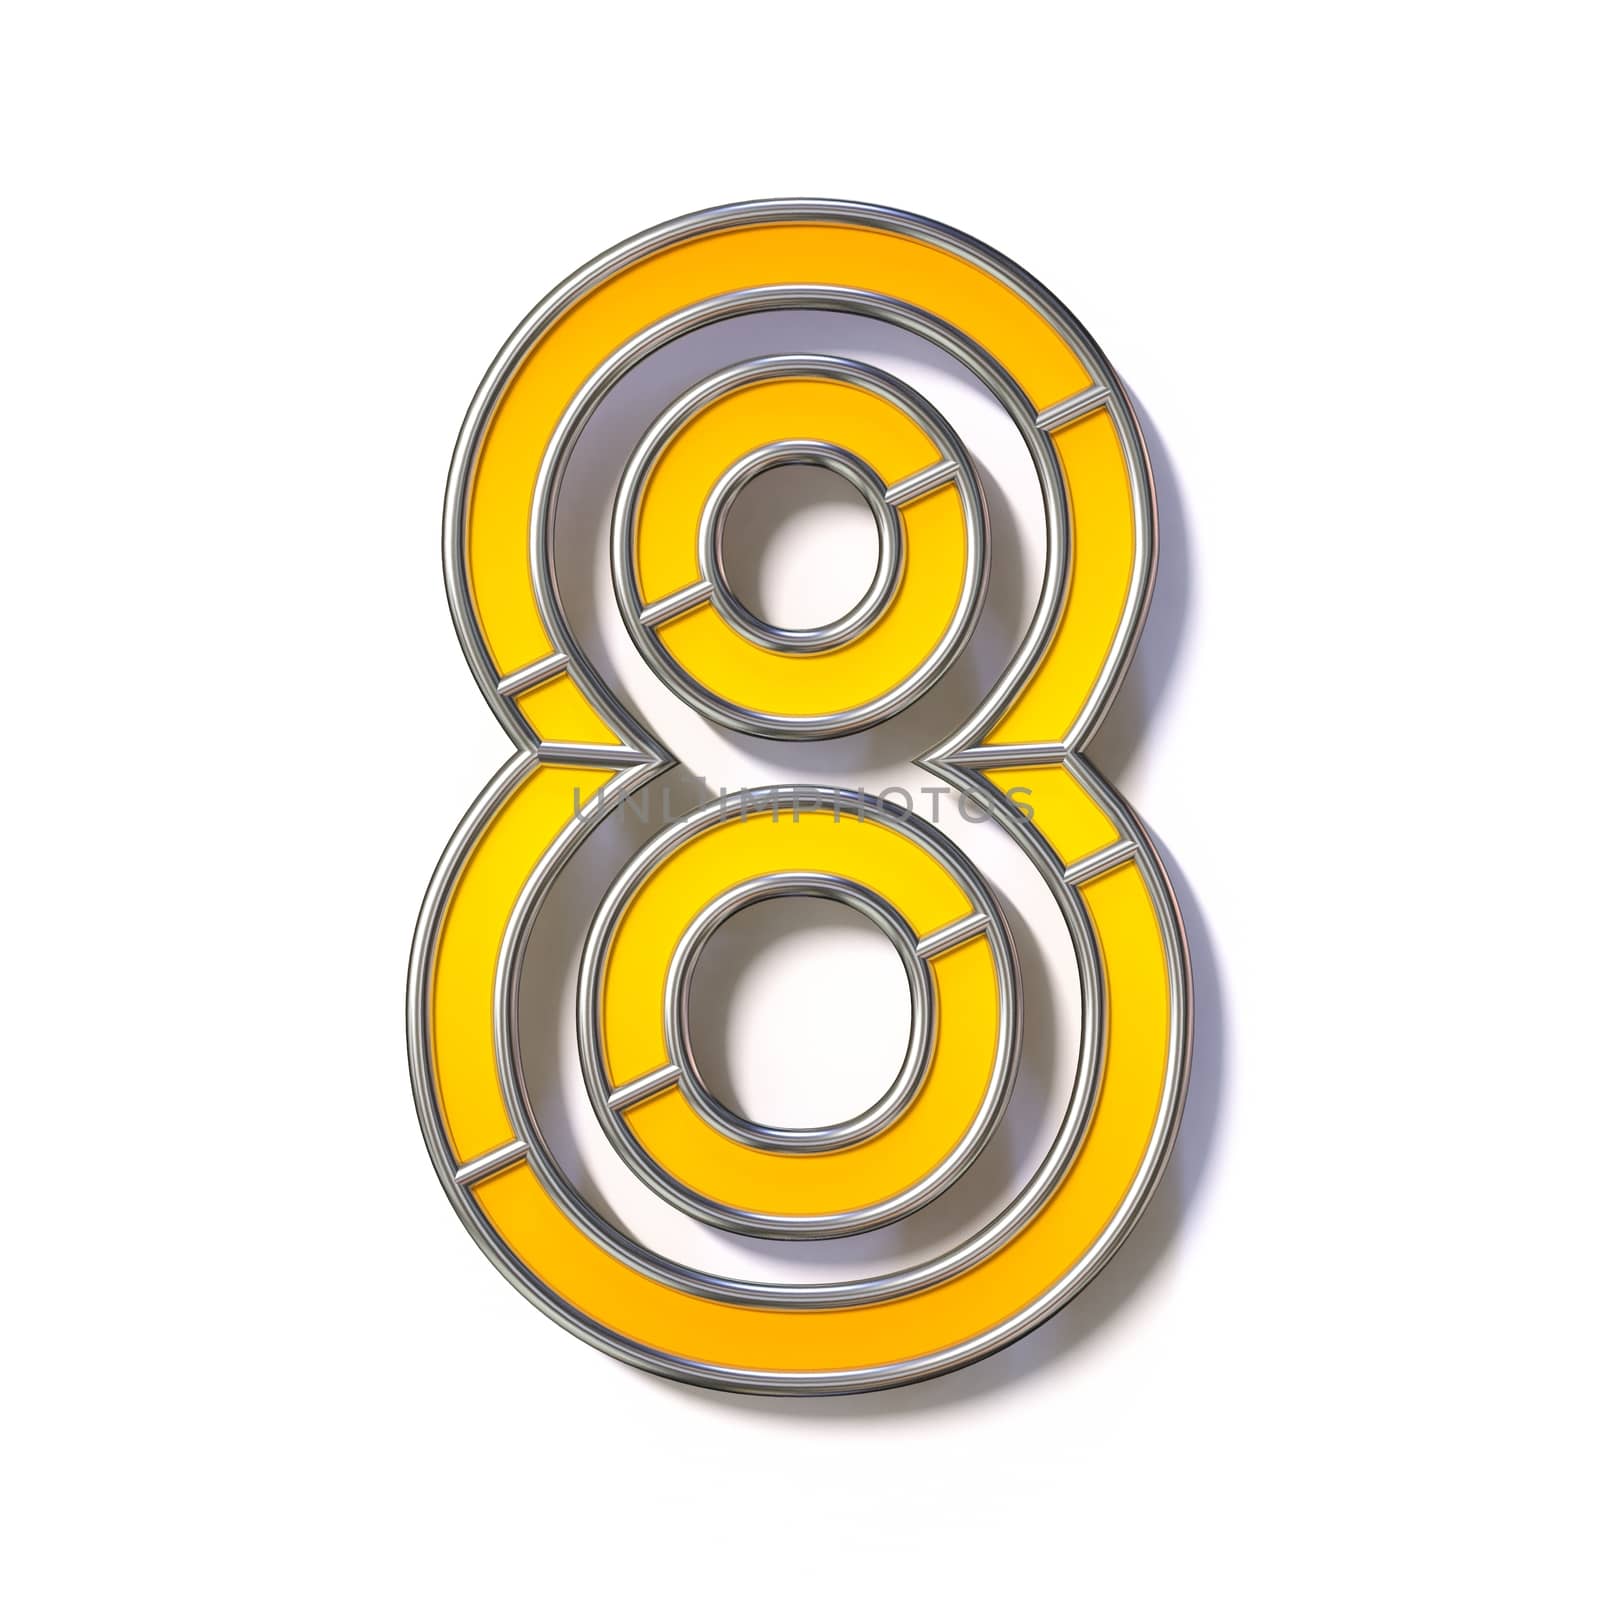 Orange metal wire font Number 8 EIGHT 3D by djmilic